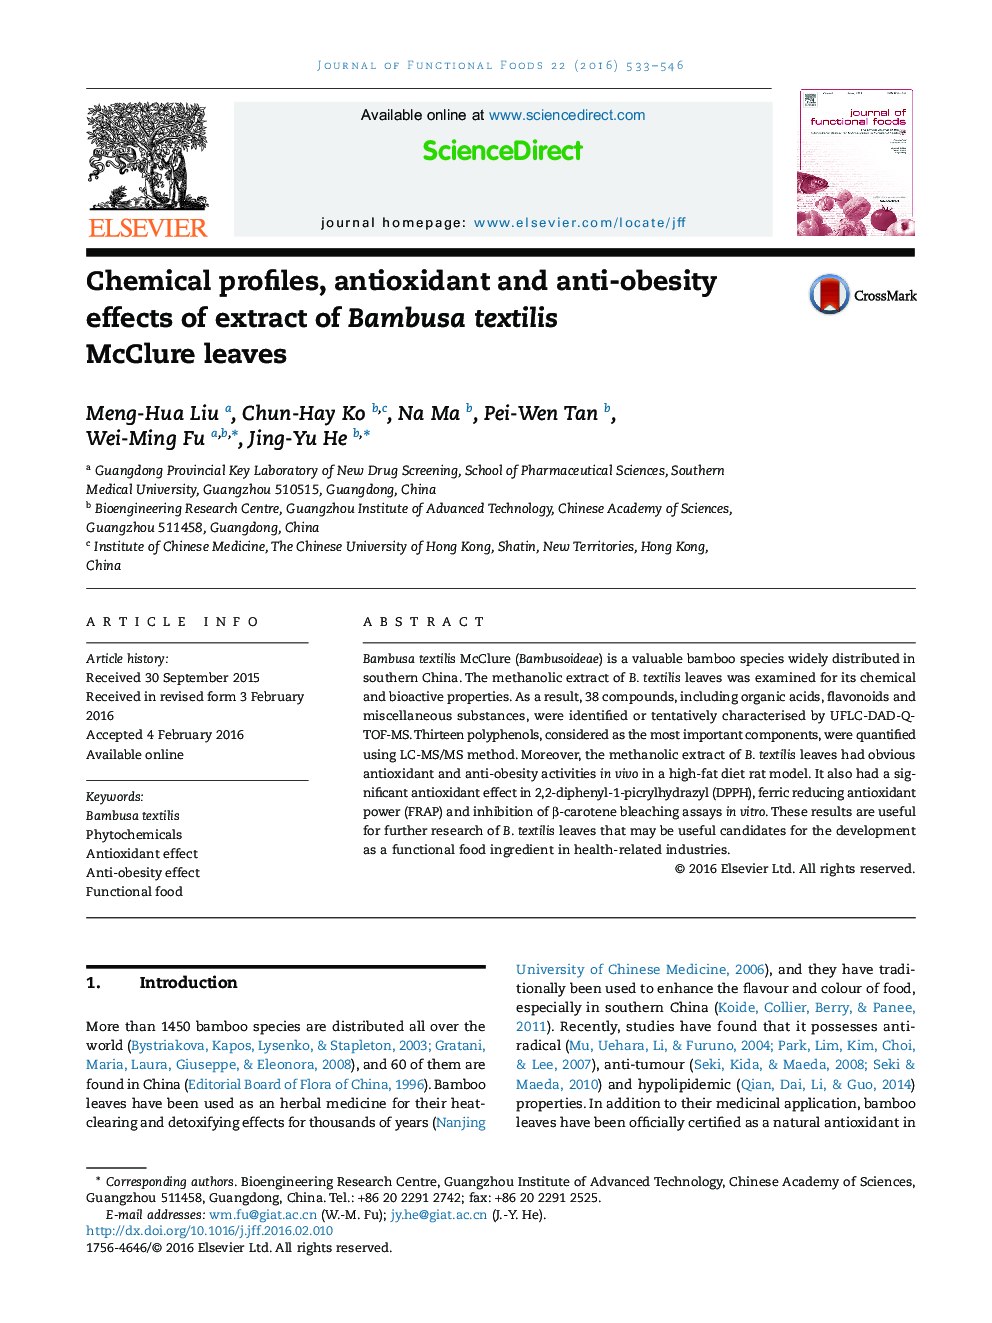 Chemical profiles, antioxidant and anti-obesity effects of extract of Bambusa textilis McClure leaves